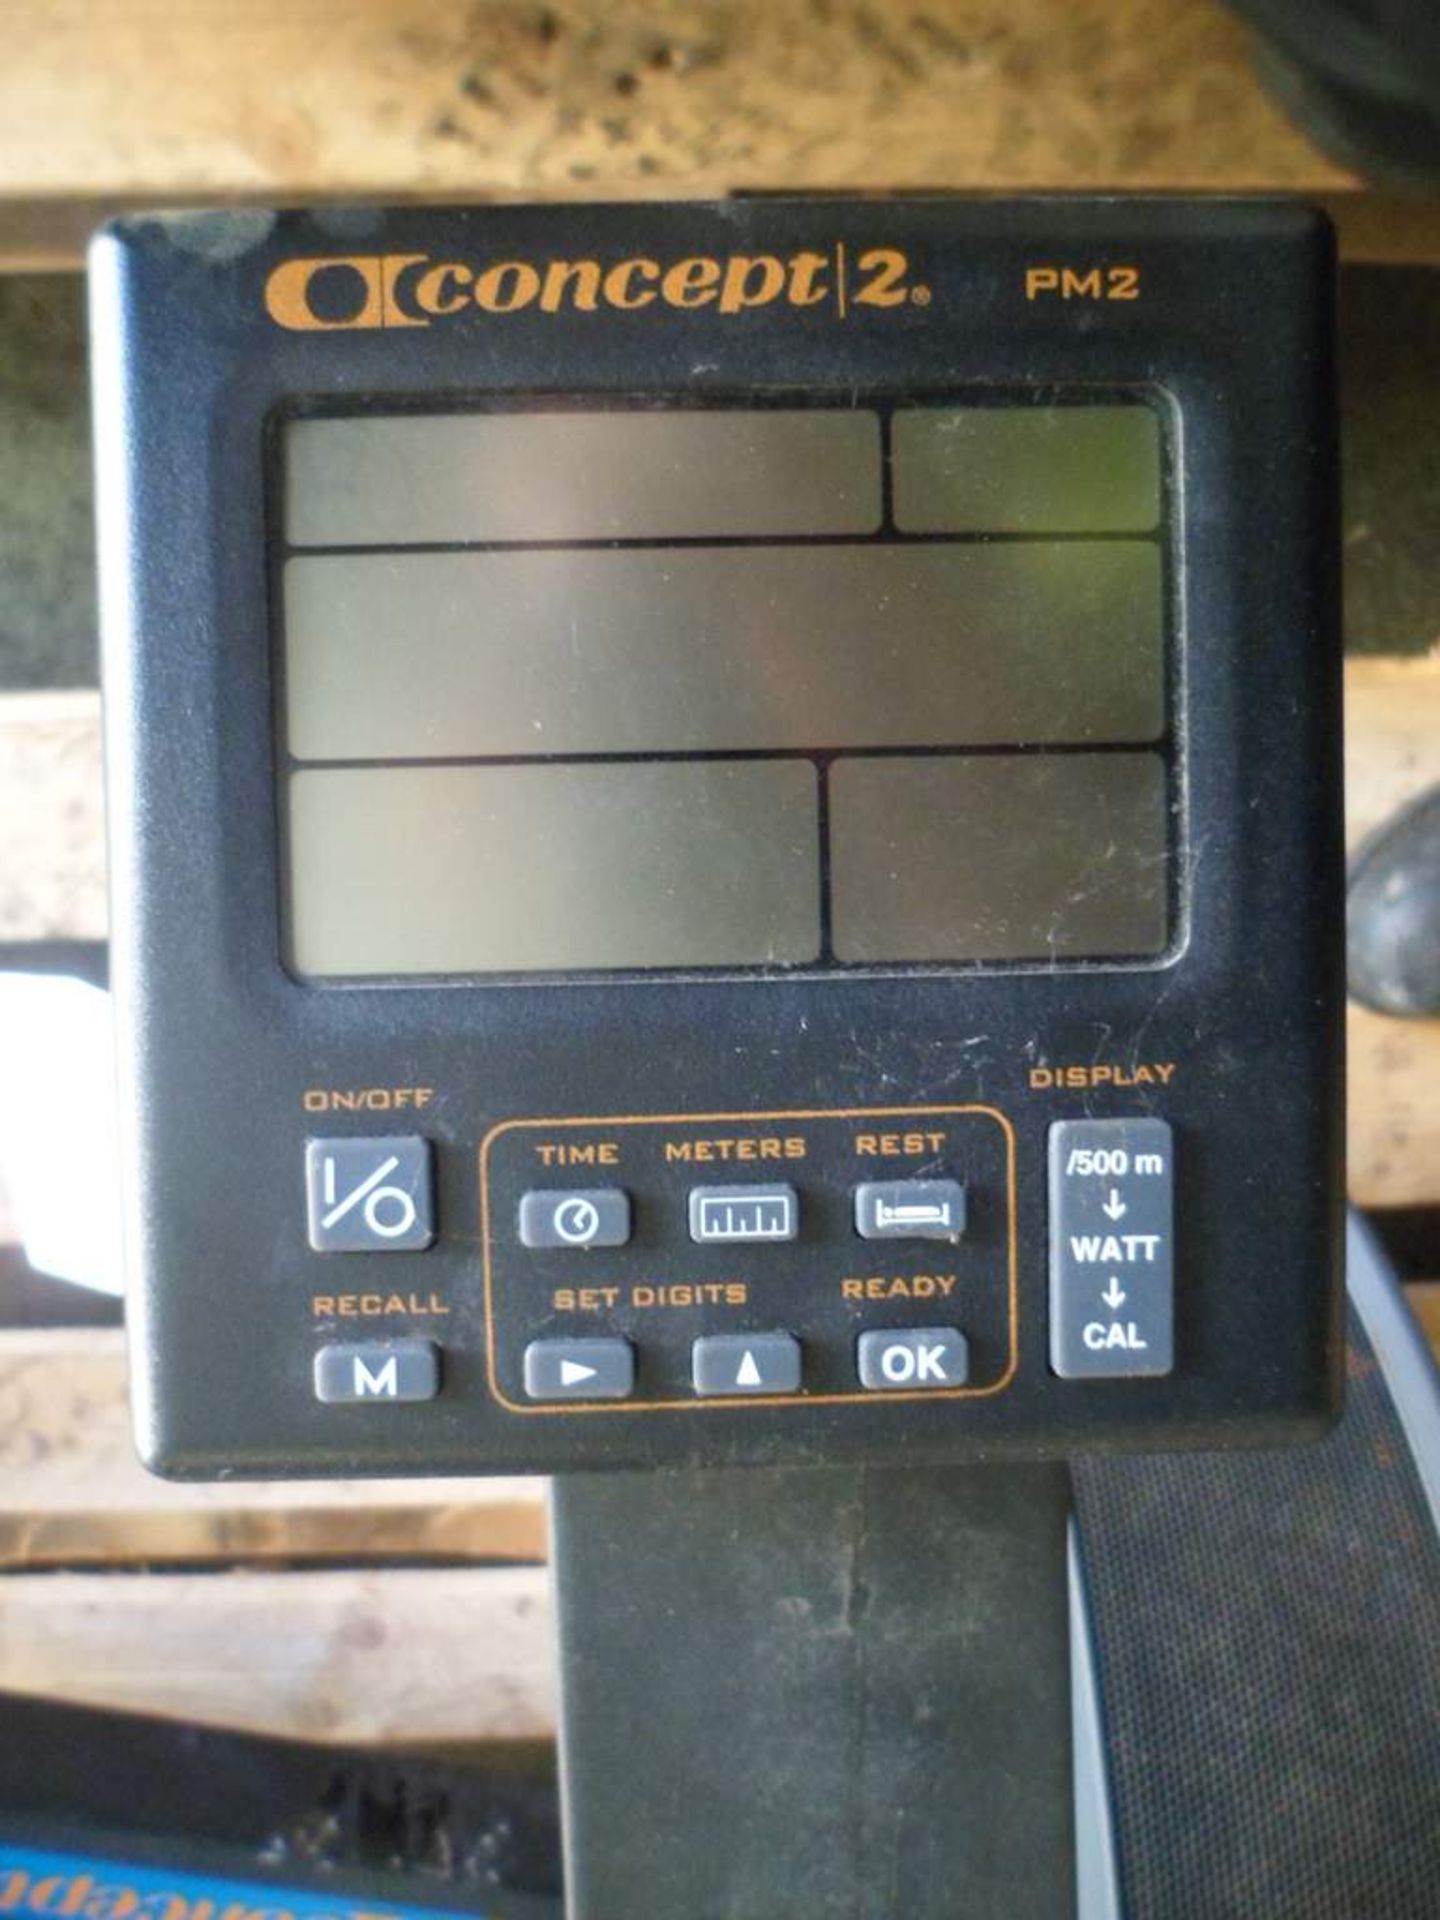 Indoor concept 2 rower - PM2 - Image 3 of 3